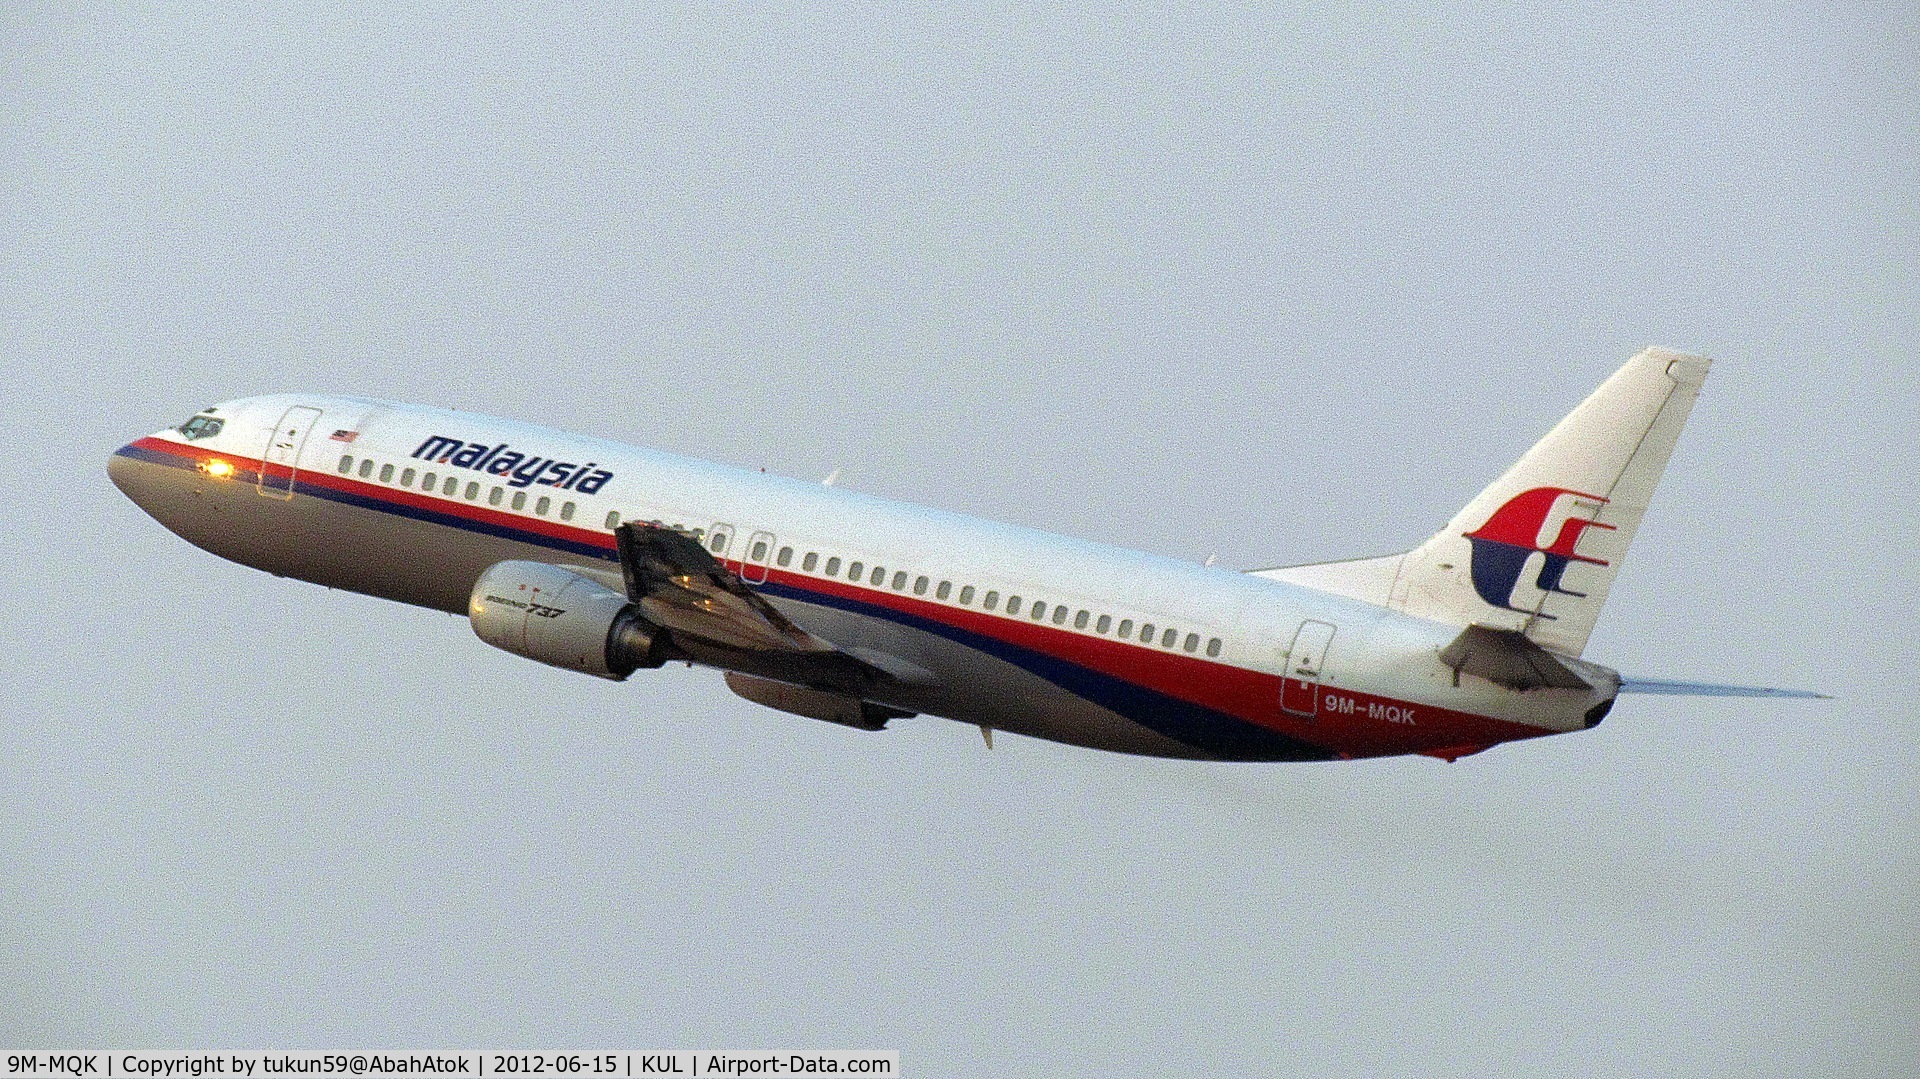 9M-MQK, Boeing 737-4H6 C/N 27384, Malaysia Airlines